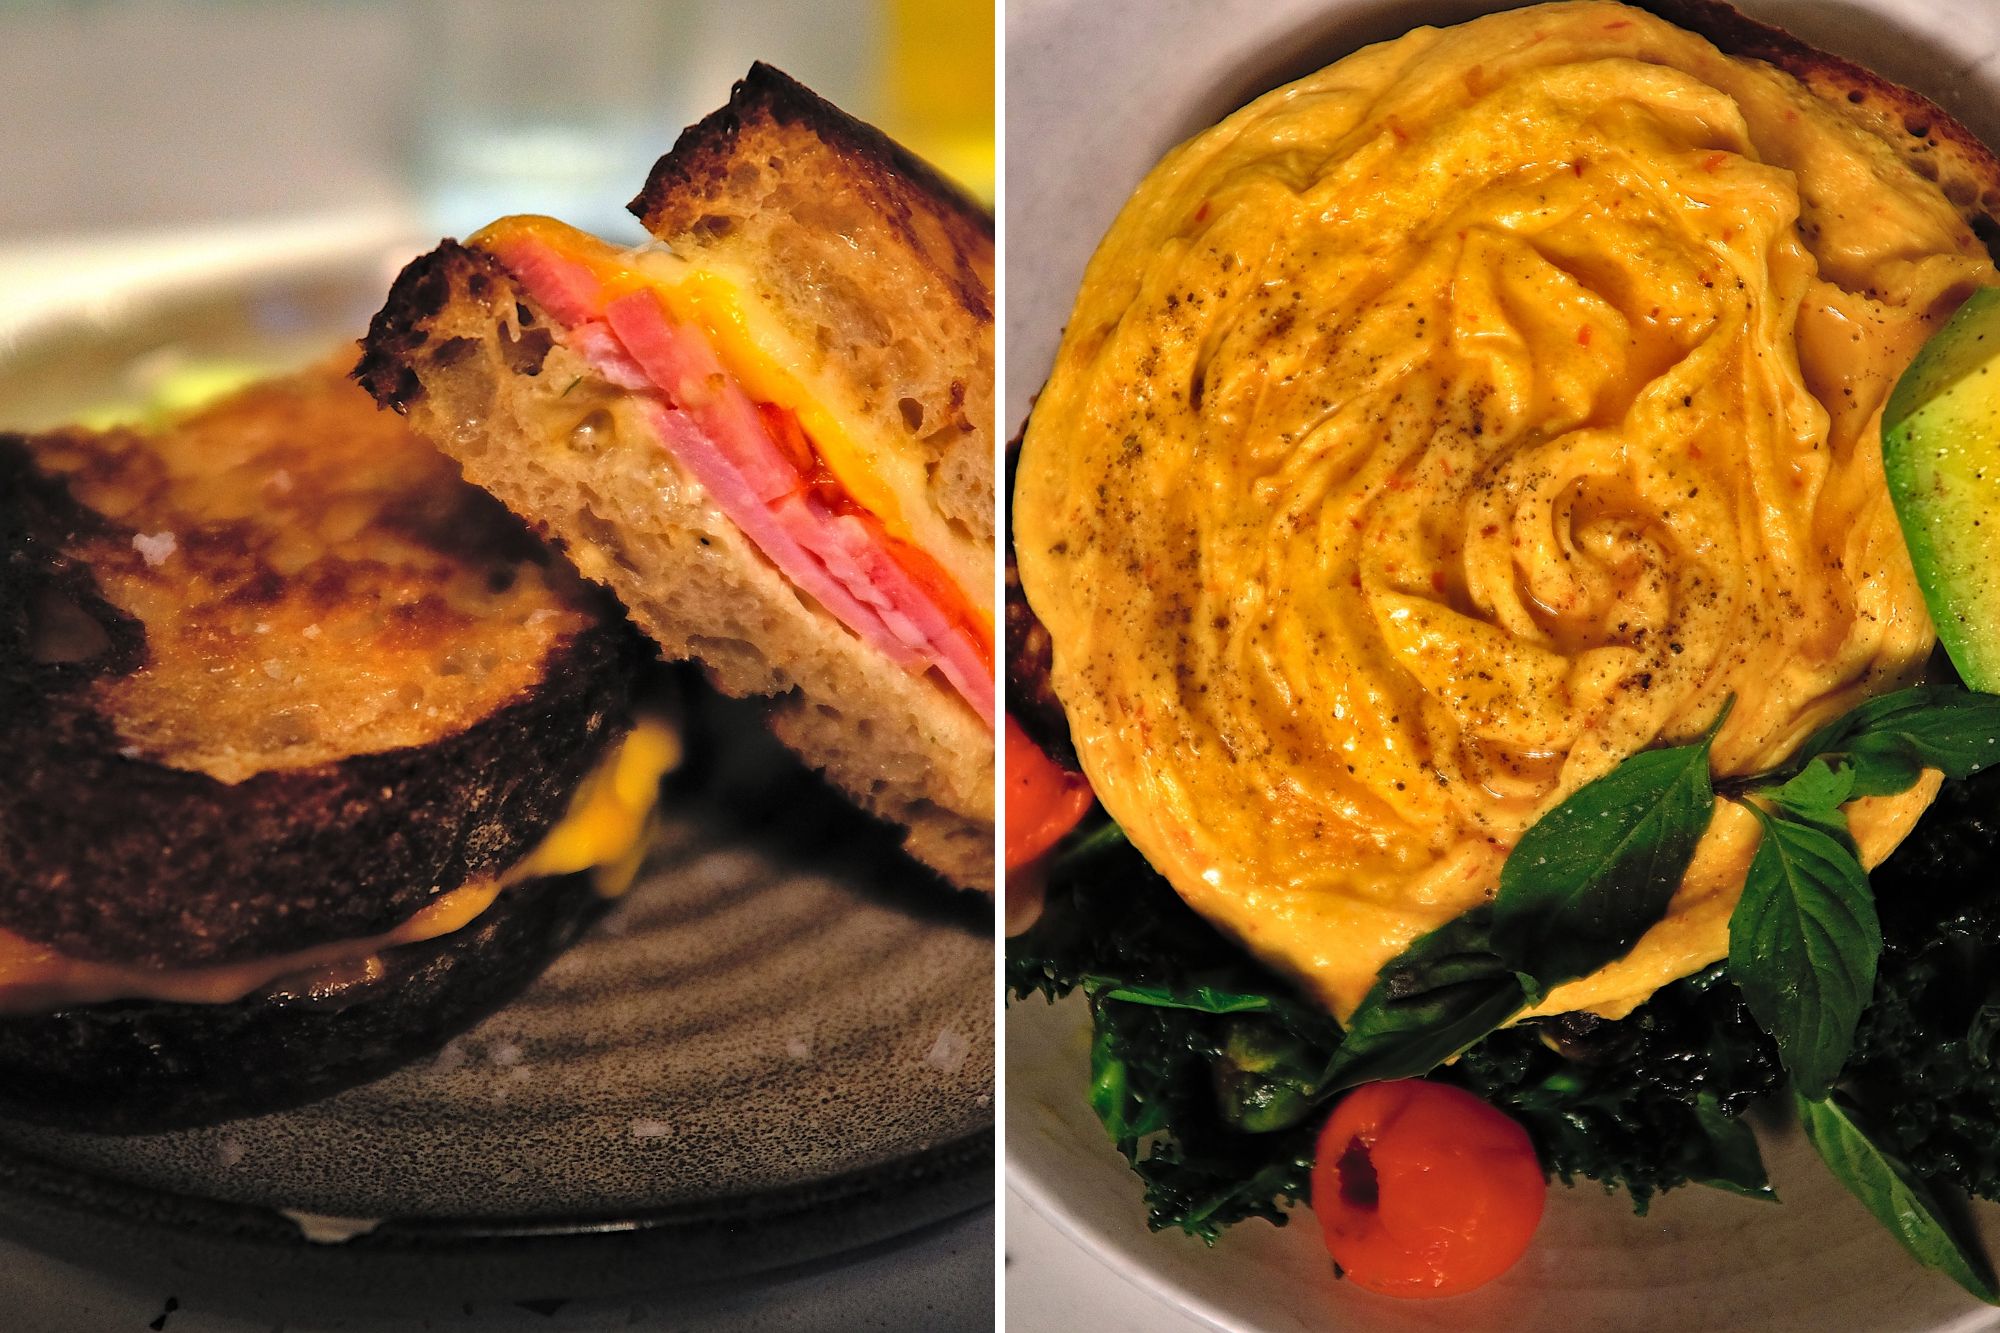 Two dishes from Sonnyboy: Ham and cheese toastie and harissa folded eggs